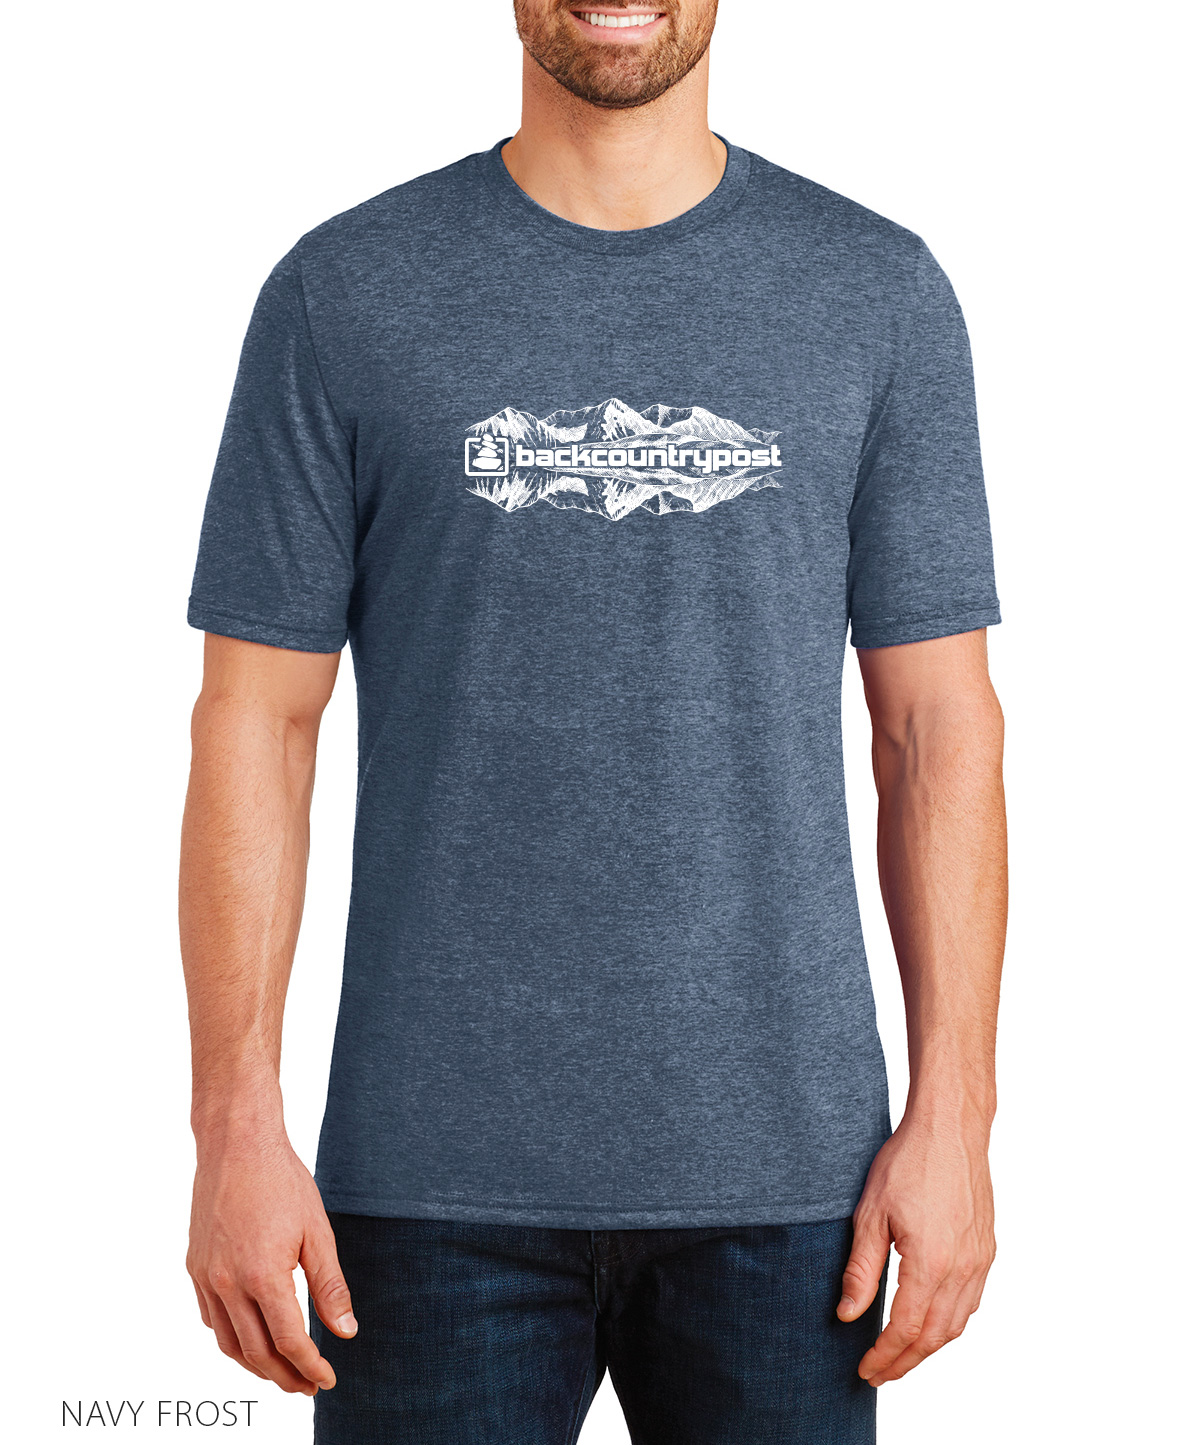 Backcountry Post Reflection Shirt – Backcountry Post Store